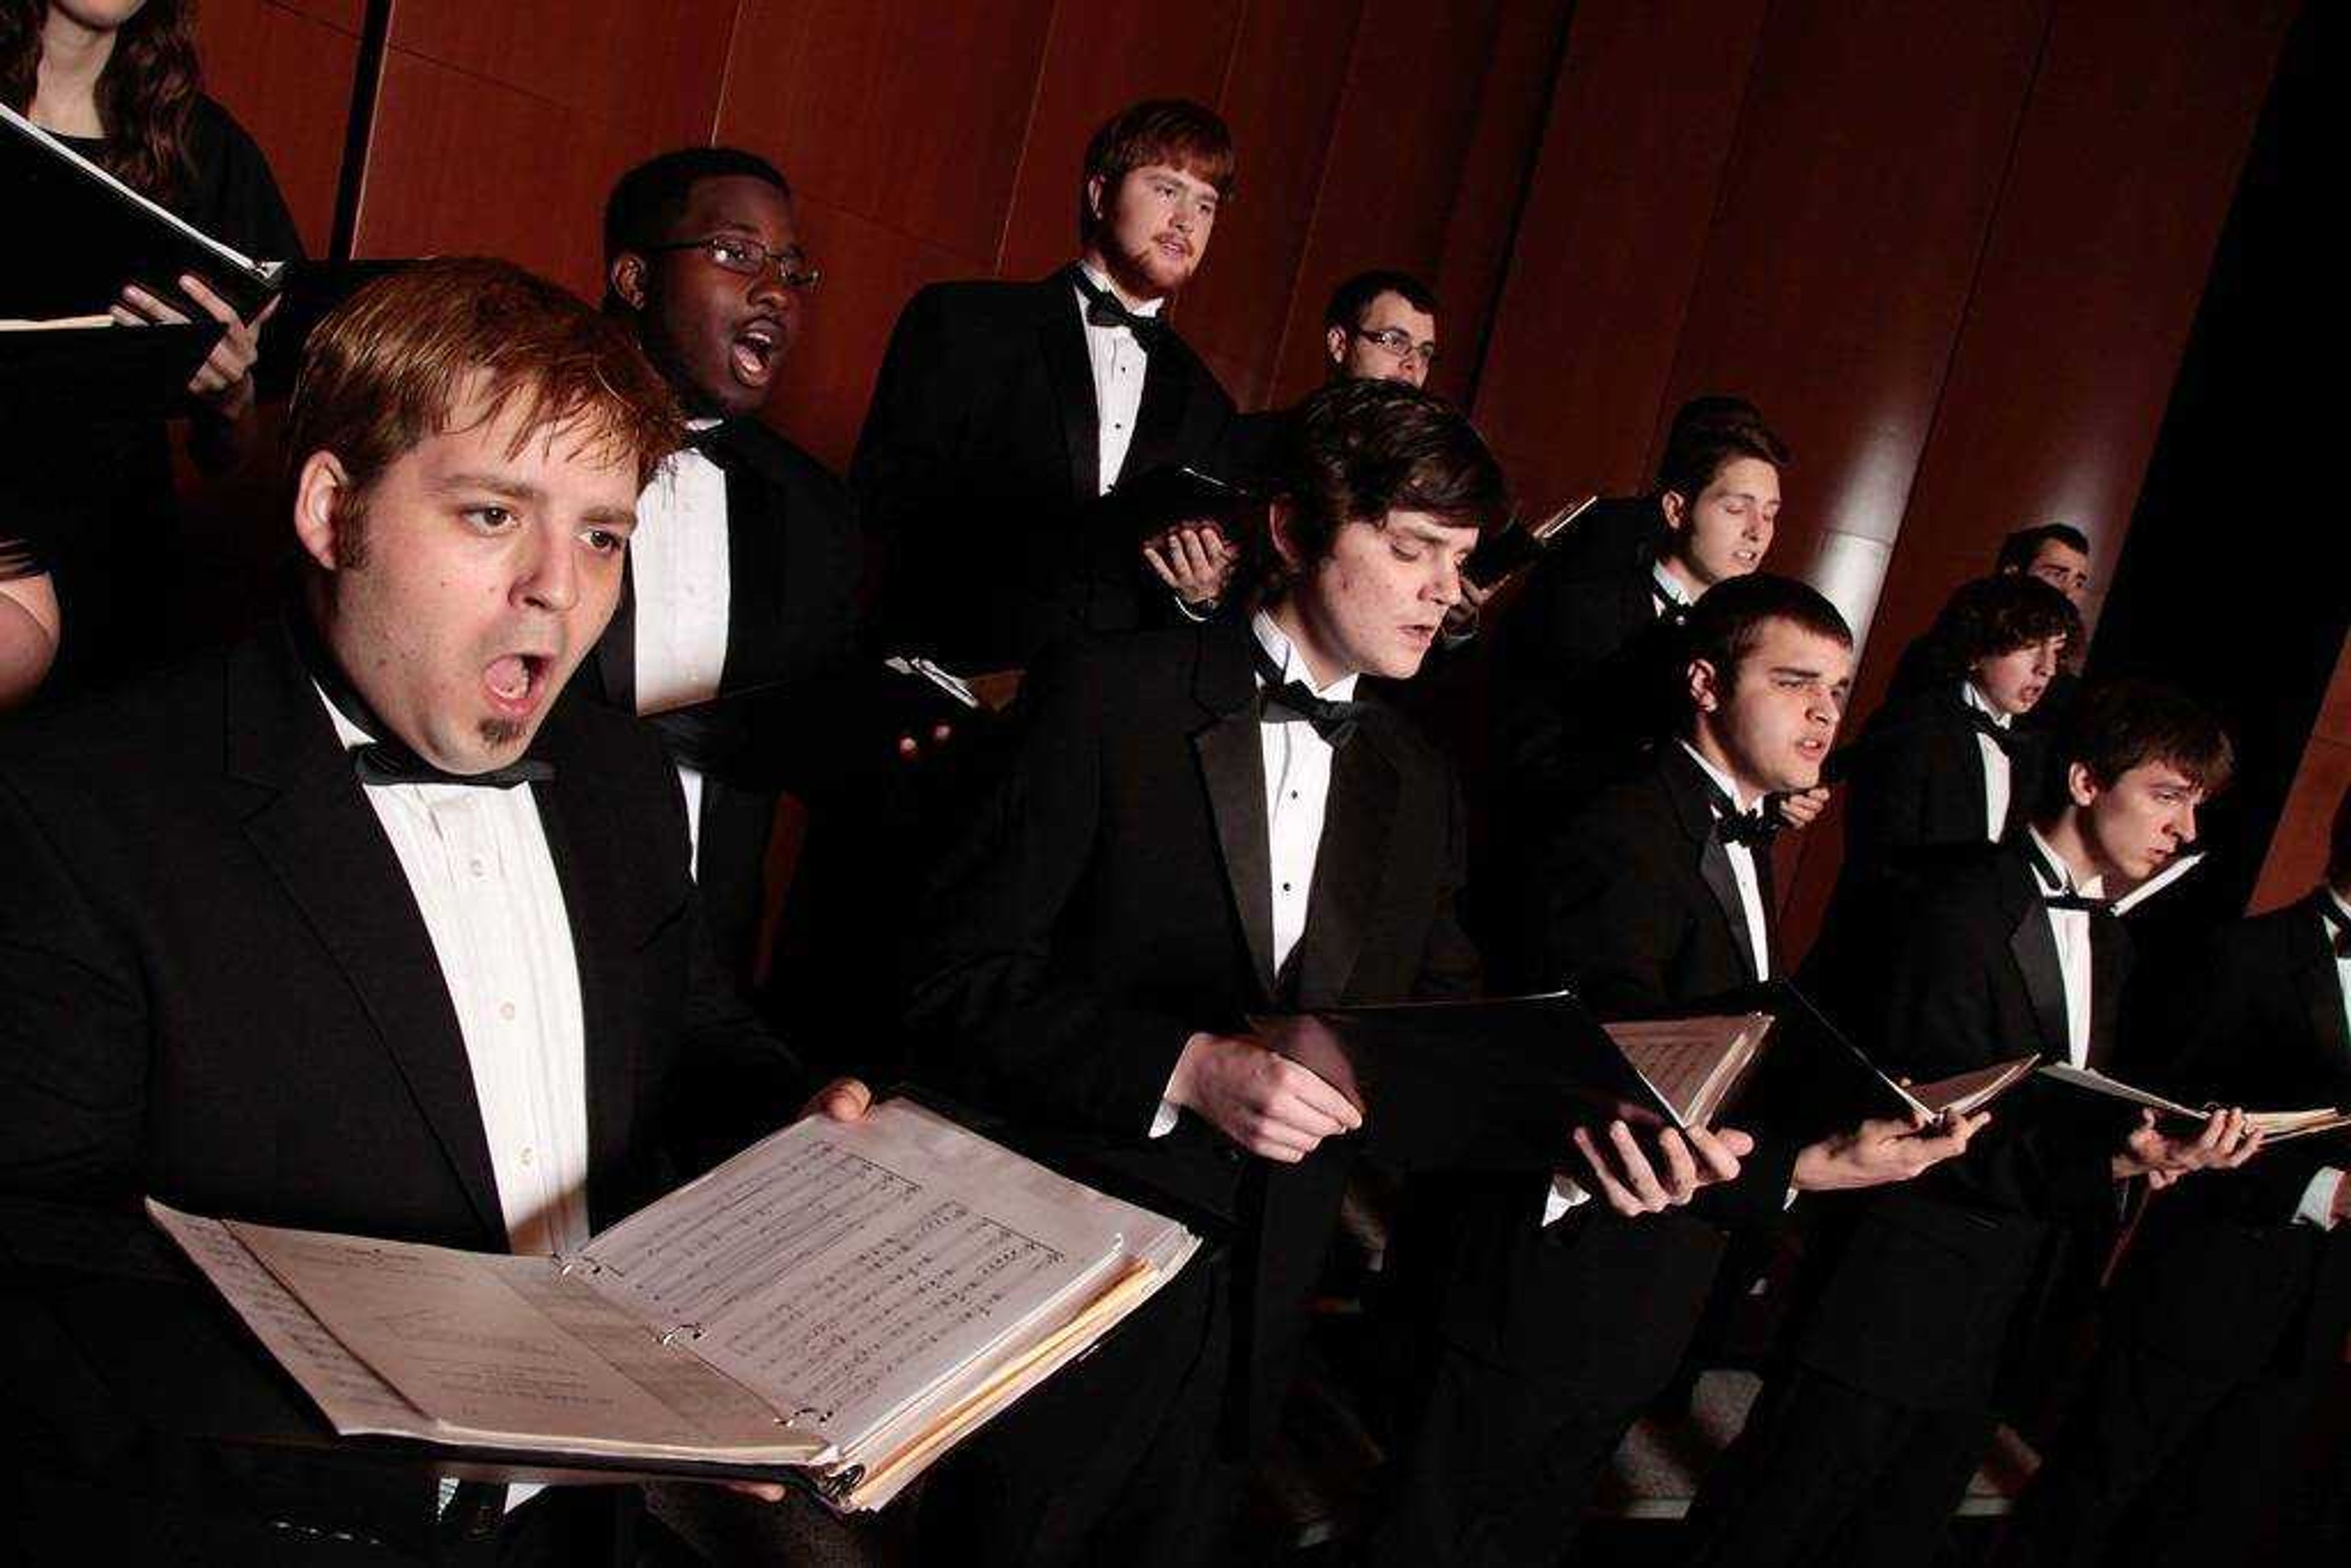 The Men's Choral Festival will allow students from area high schools to perform with the Southeast University Choir, Chamber Choir and a music fraternity. Submitted photo.